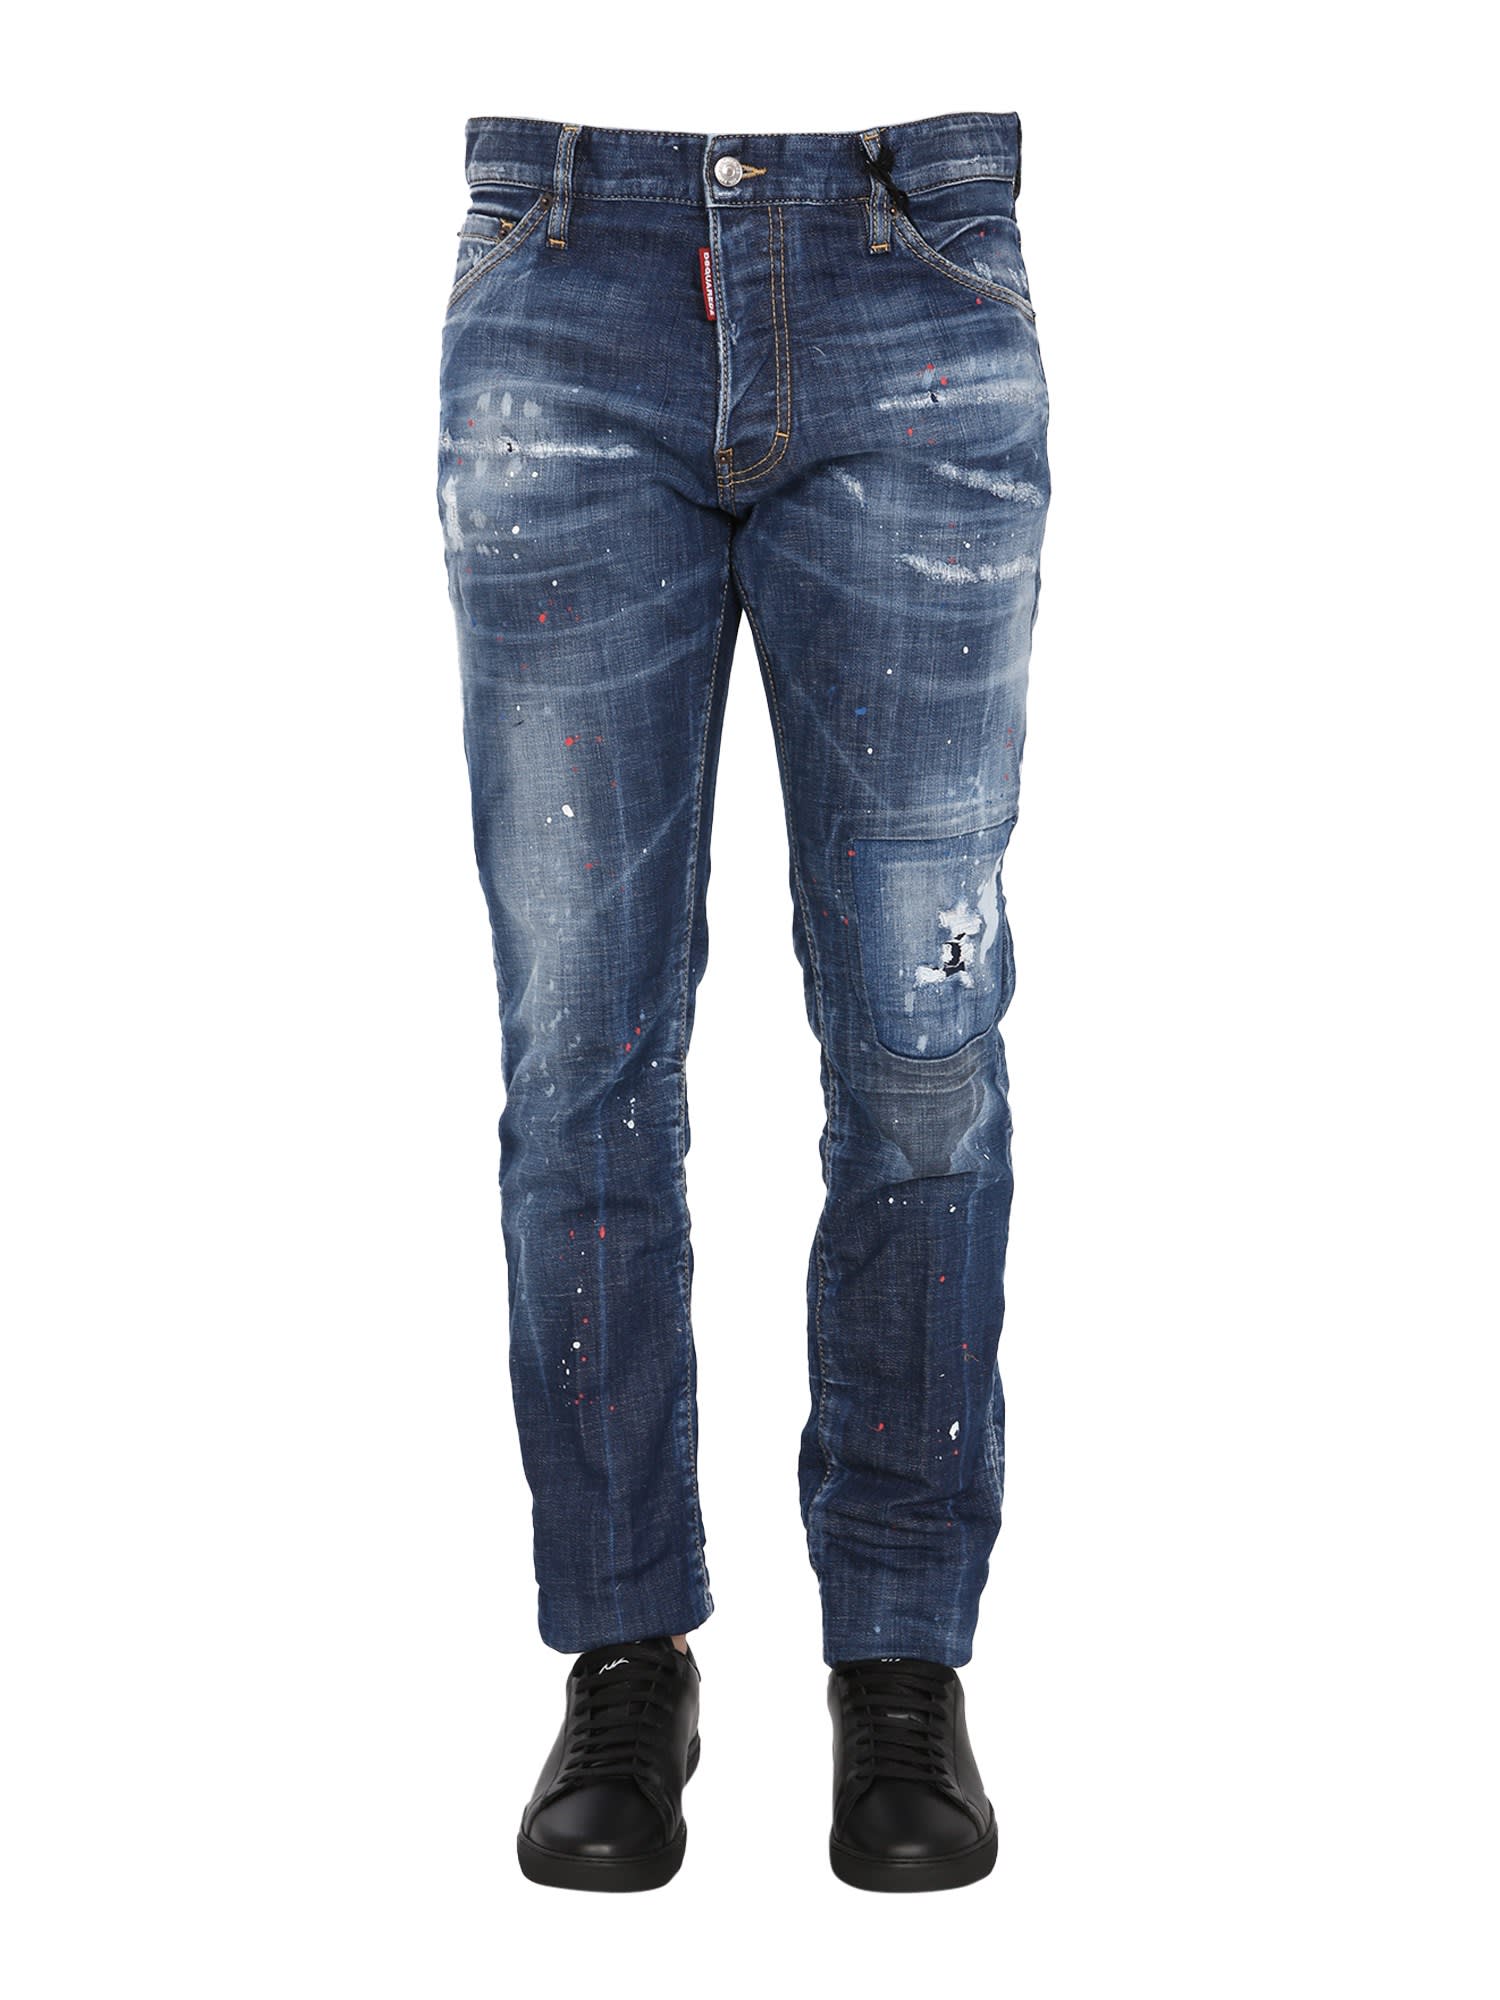 DSQUARED2 COOL GUY JEANS,S71LB0895 S30342470